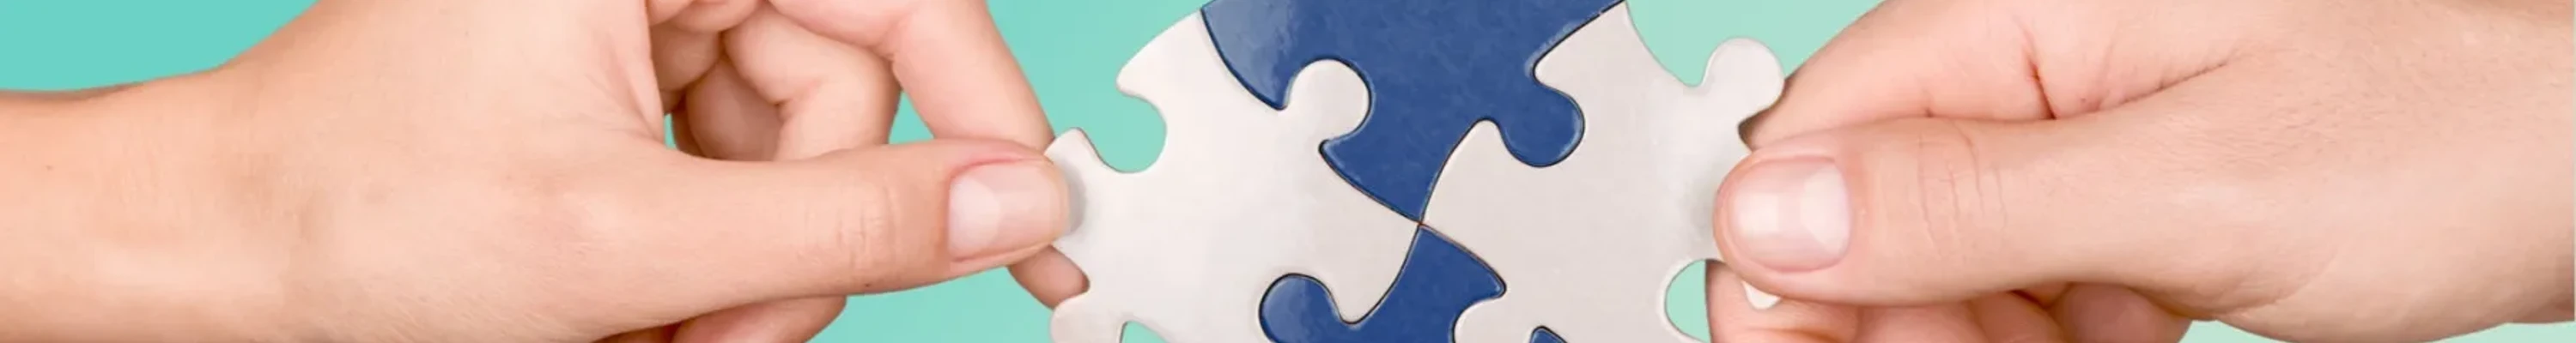 Jigsaw puzzle pieces being put together and held by two hands